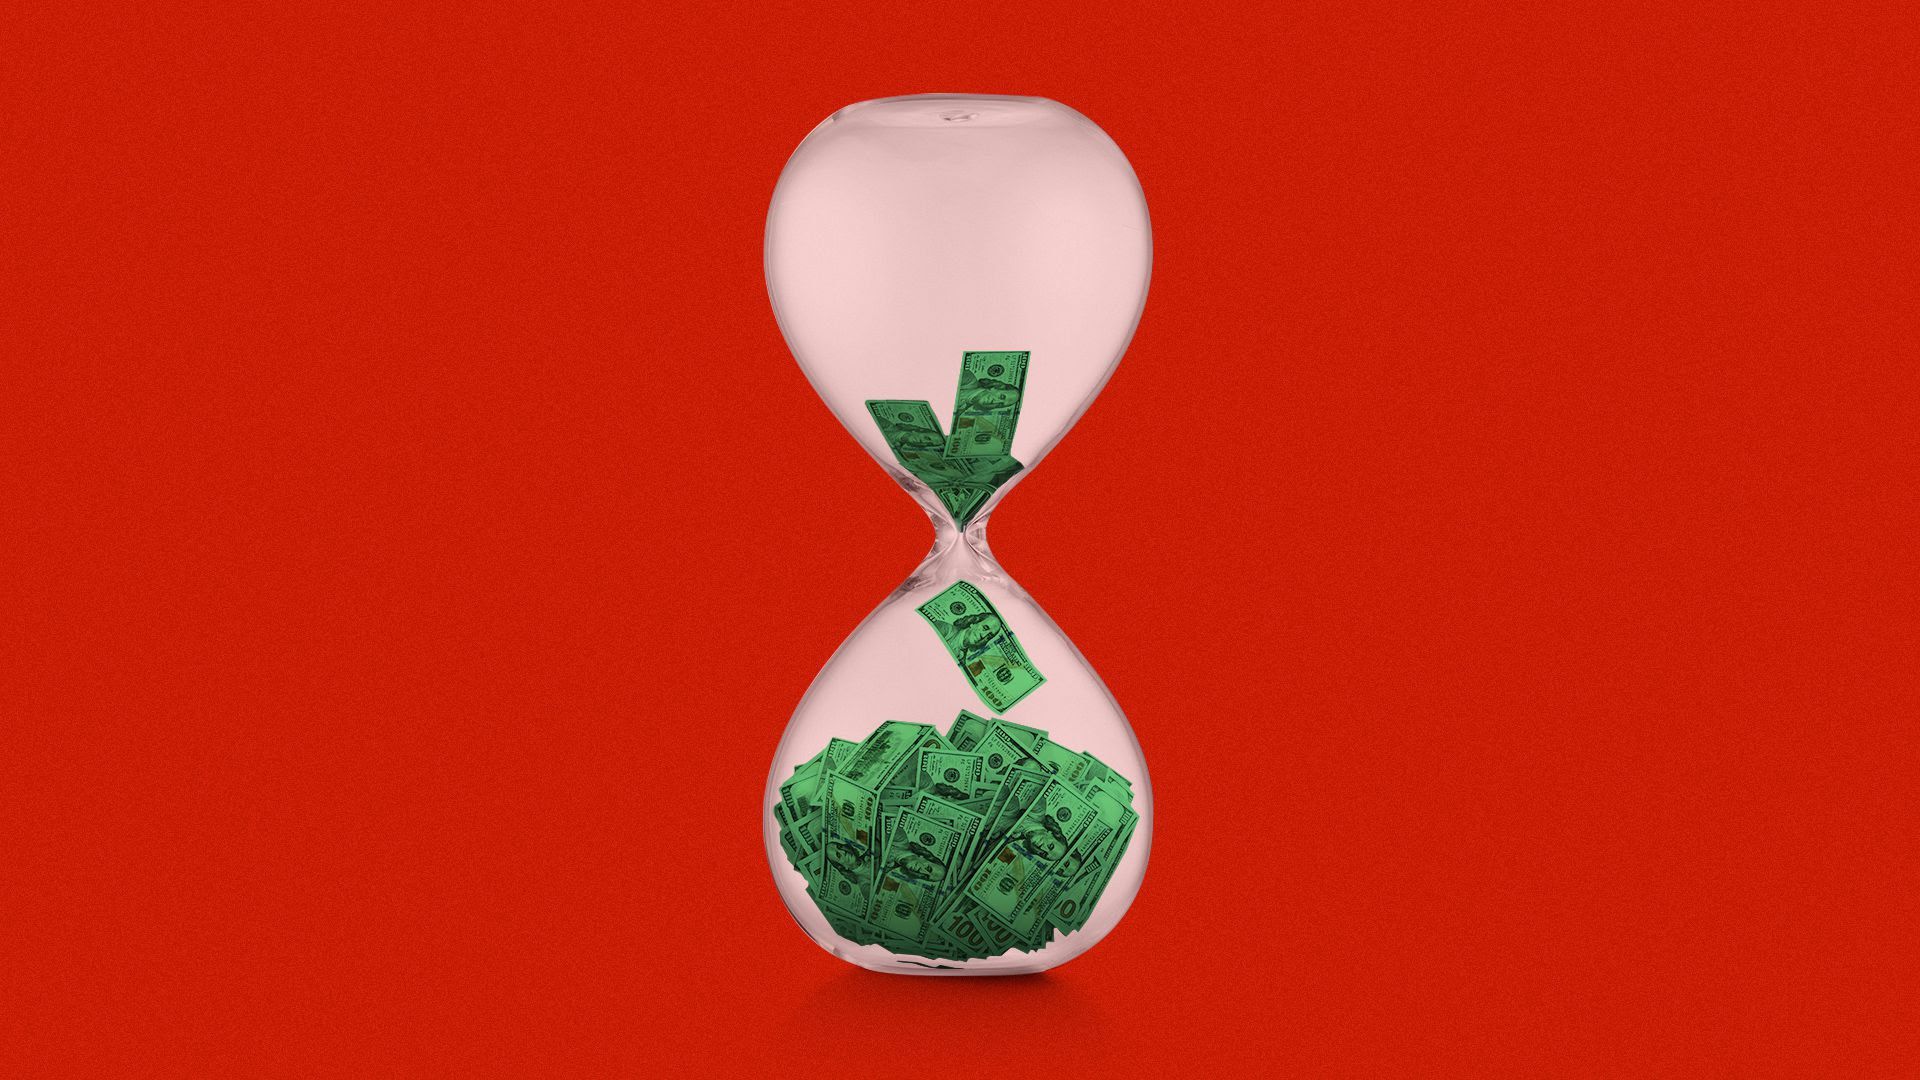 An illustration of an hourglass with money instead of sand.